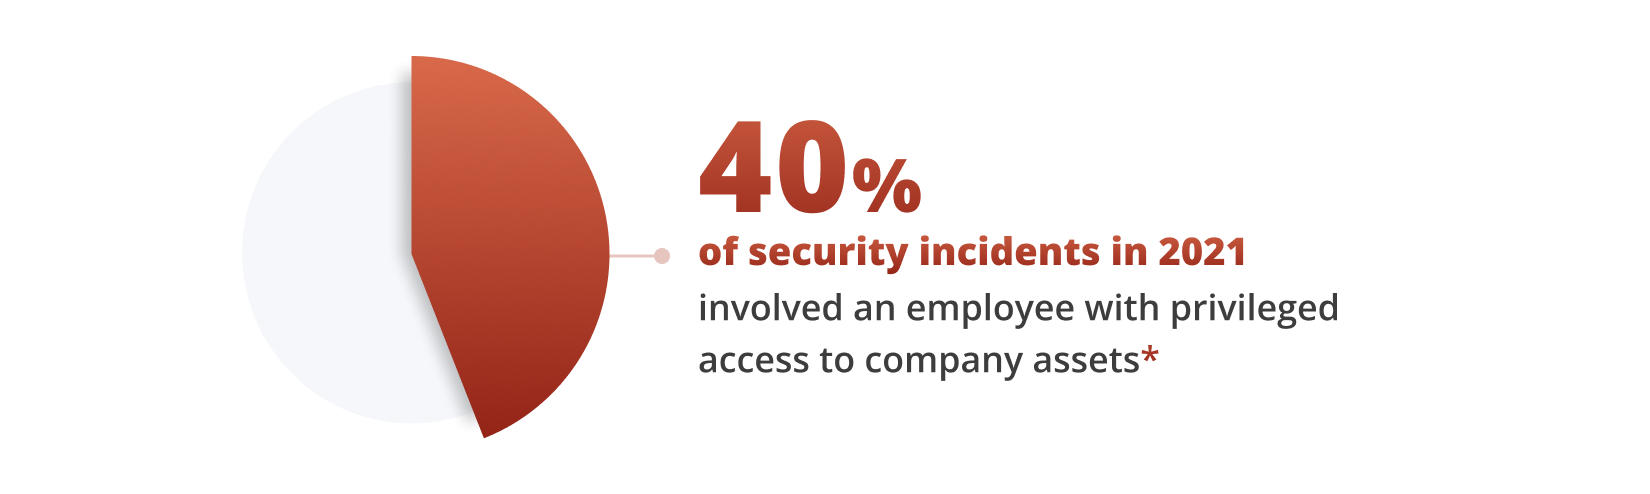 40% of security incidents in 2021 involved an employee with privileged access to company assets